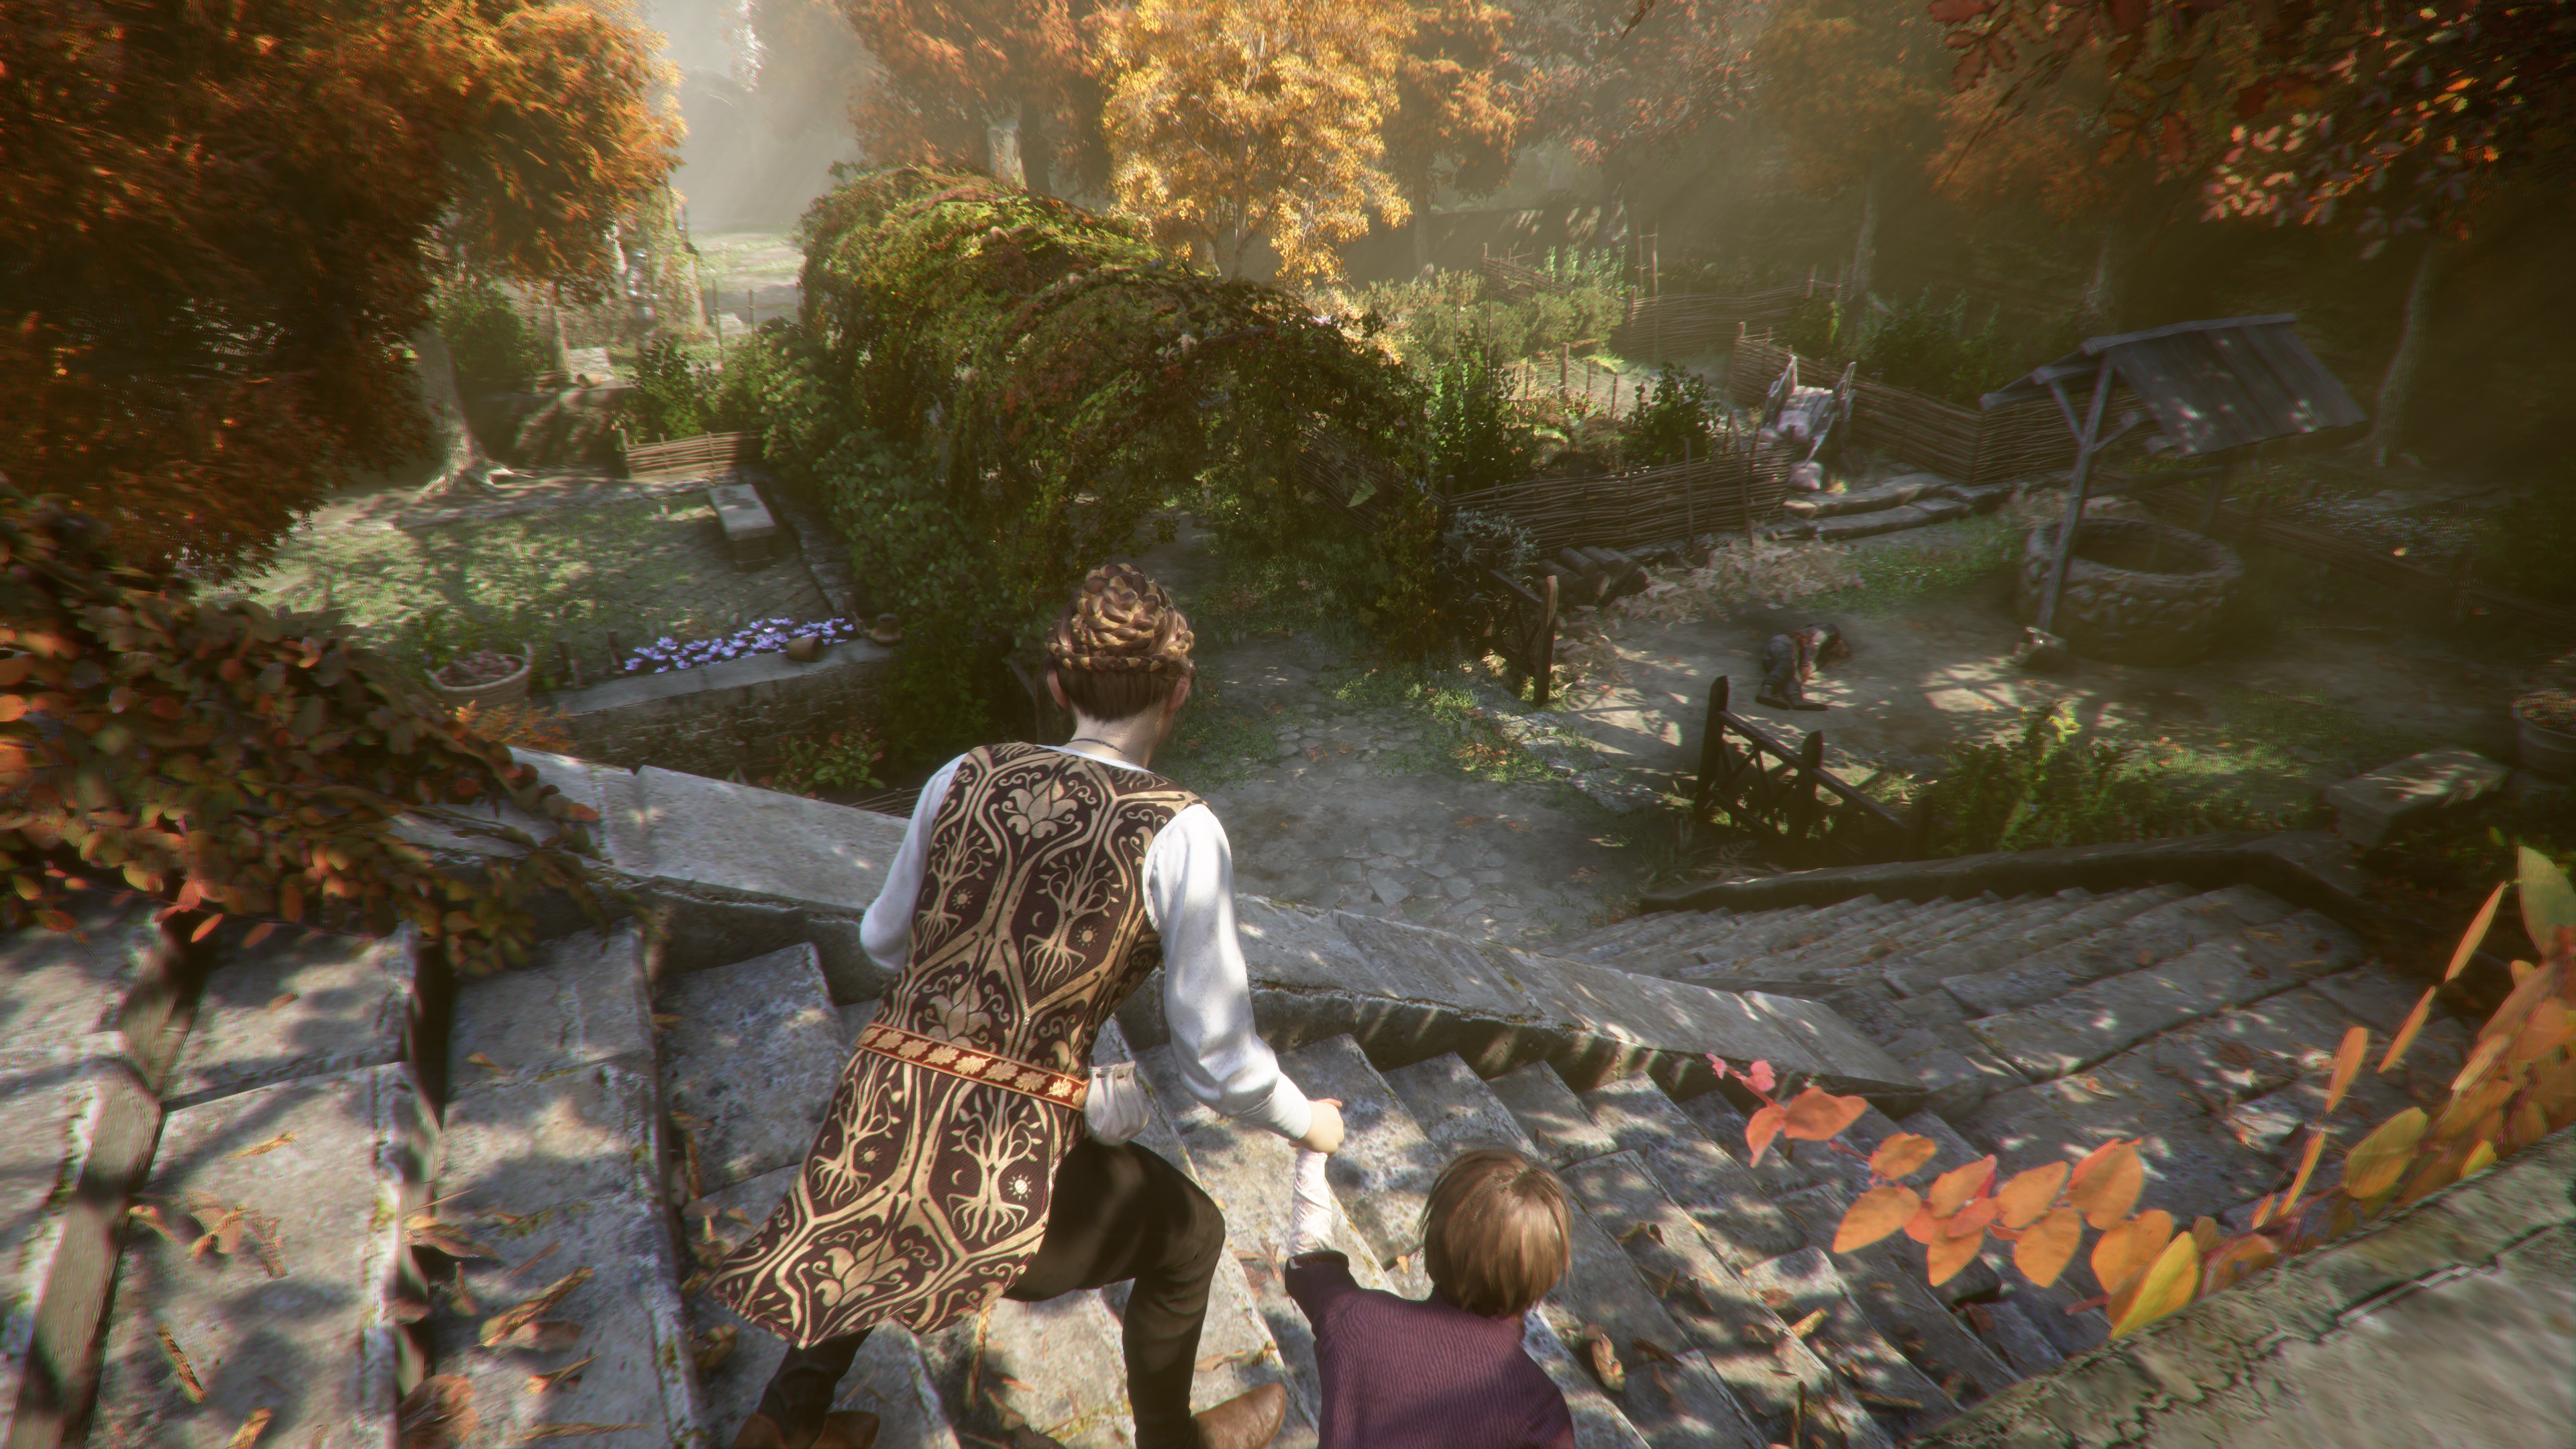 Media asset in full size related to 3dfxzone.it news item entitled as follows: Gameplay footage e screenshots in 4K del game A Plague Tale: Innocence | Image Name: news29593_A-Plague-Tale-Innocence-Screenshot_10.jpg